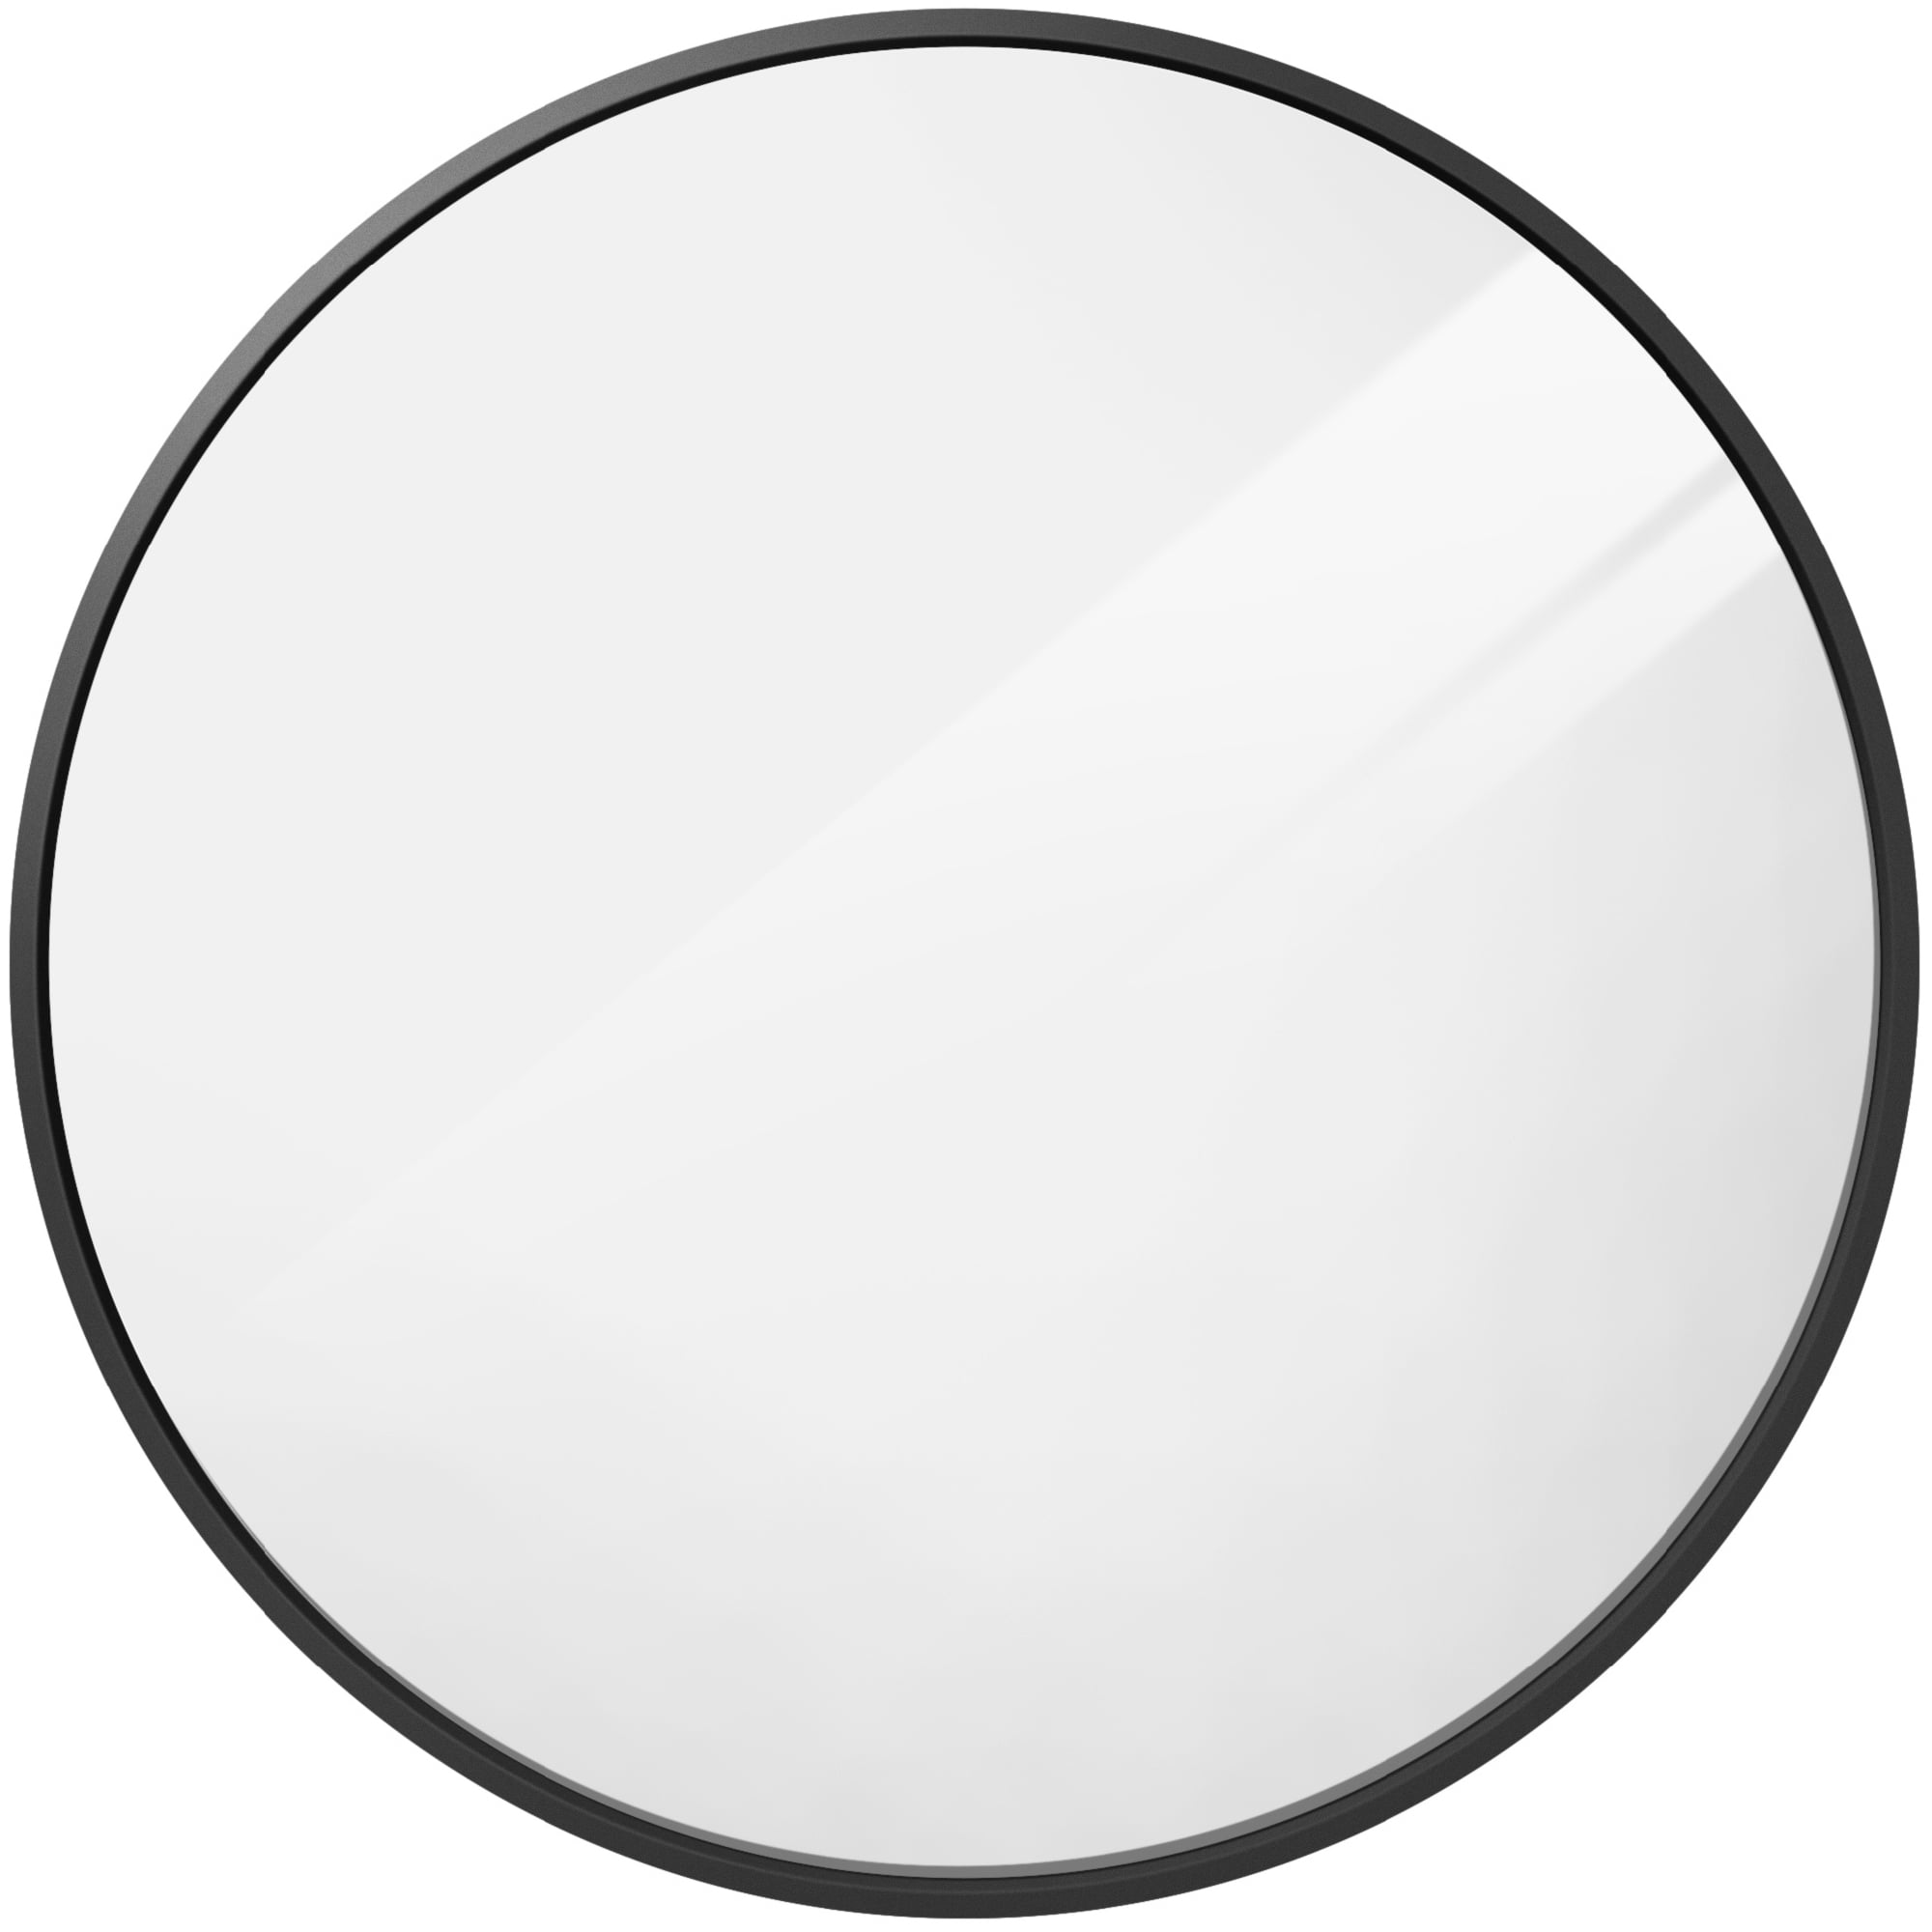 Best Choice Products 36in Framed Round, Round Black Framed Bathroom Mirrors